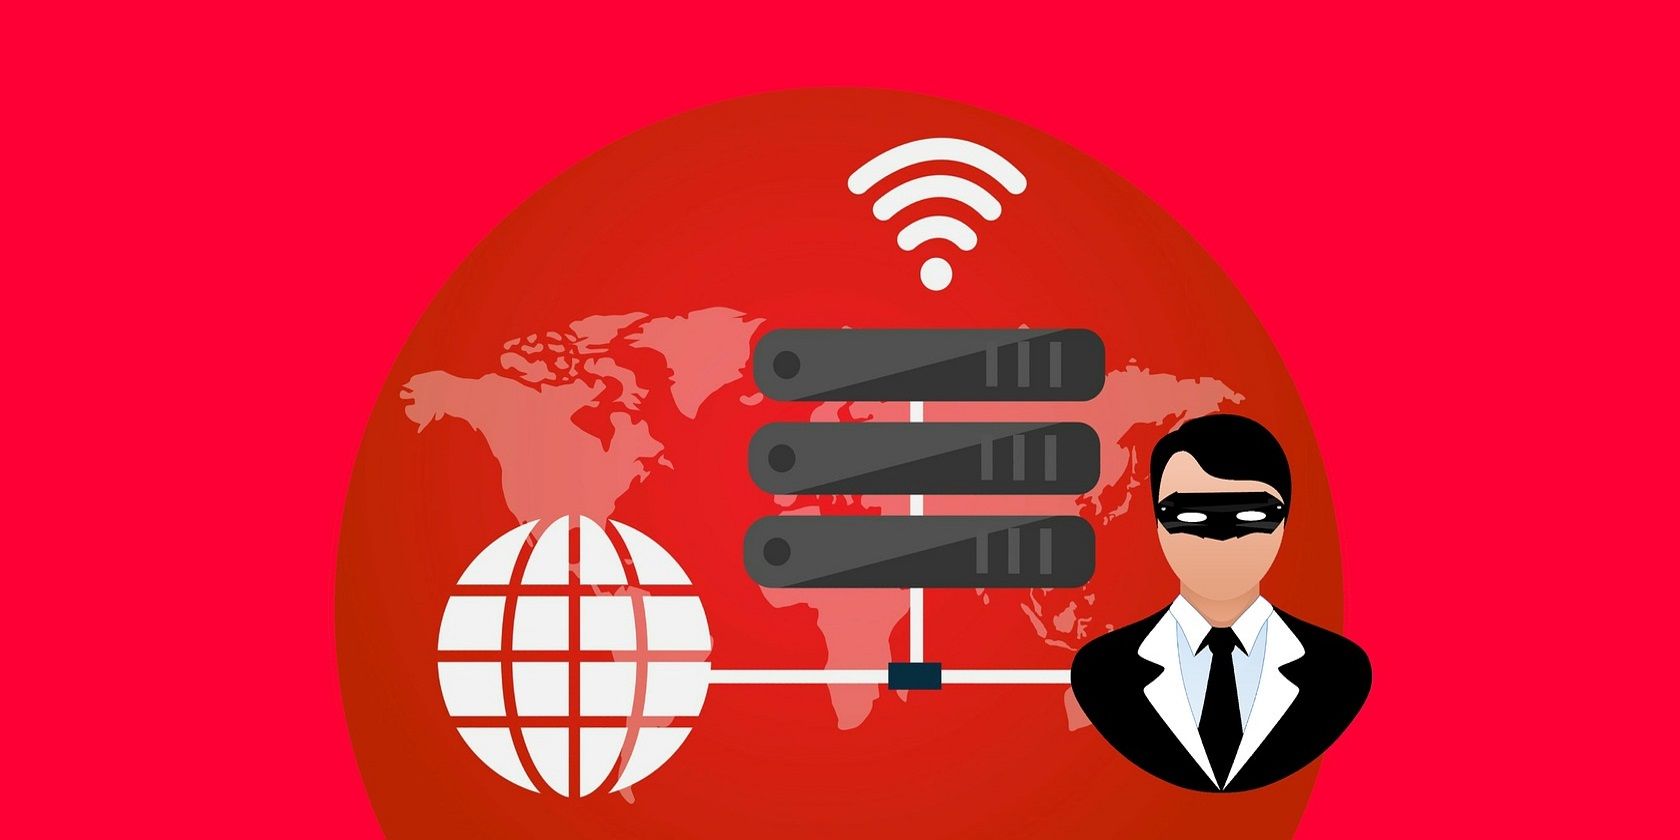 Depiction of an anonymous VPN connection